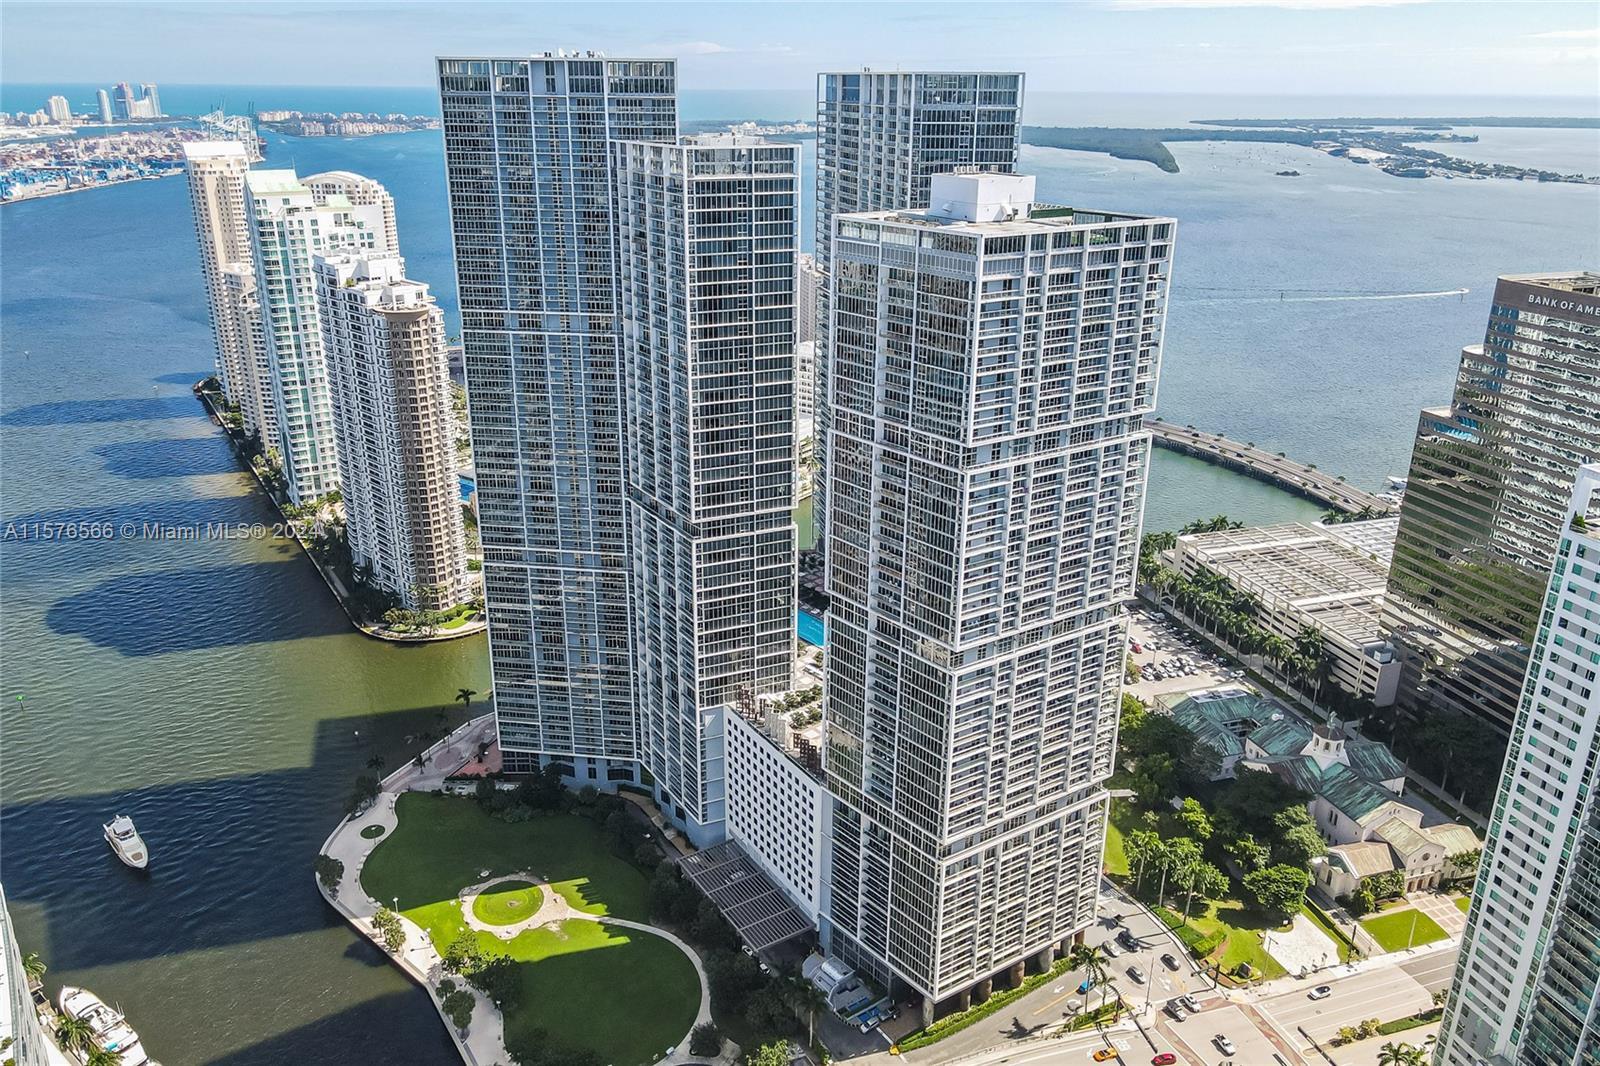 Welcome to Icon Brickell, where luxury meets waterfront living. This exquisite 2-bedroom, 2-bathroom